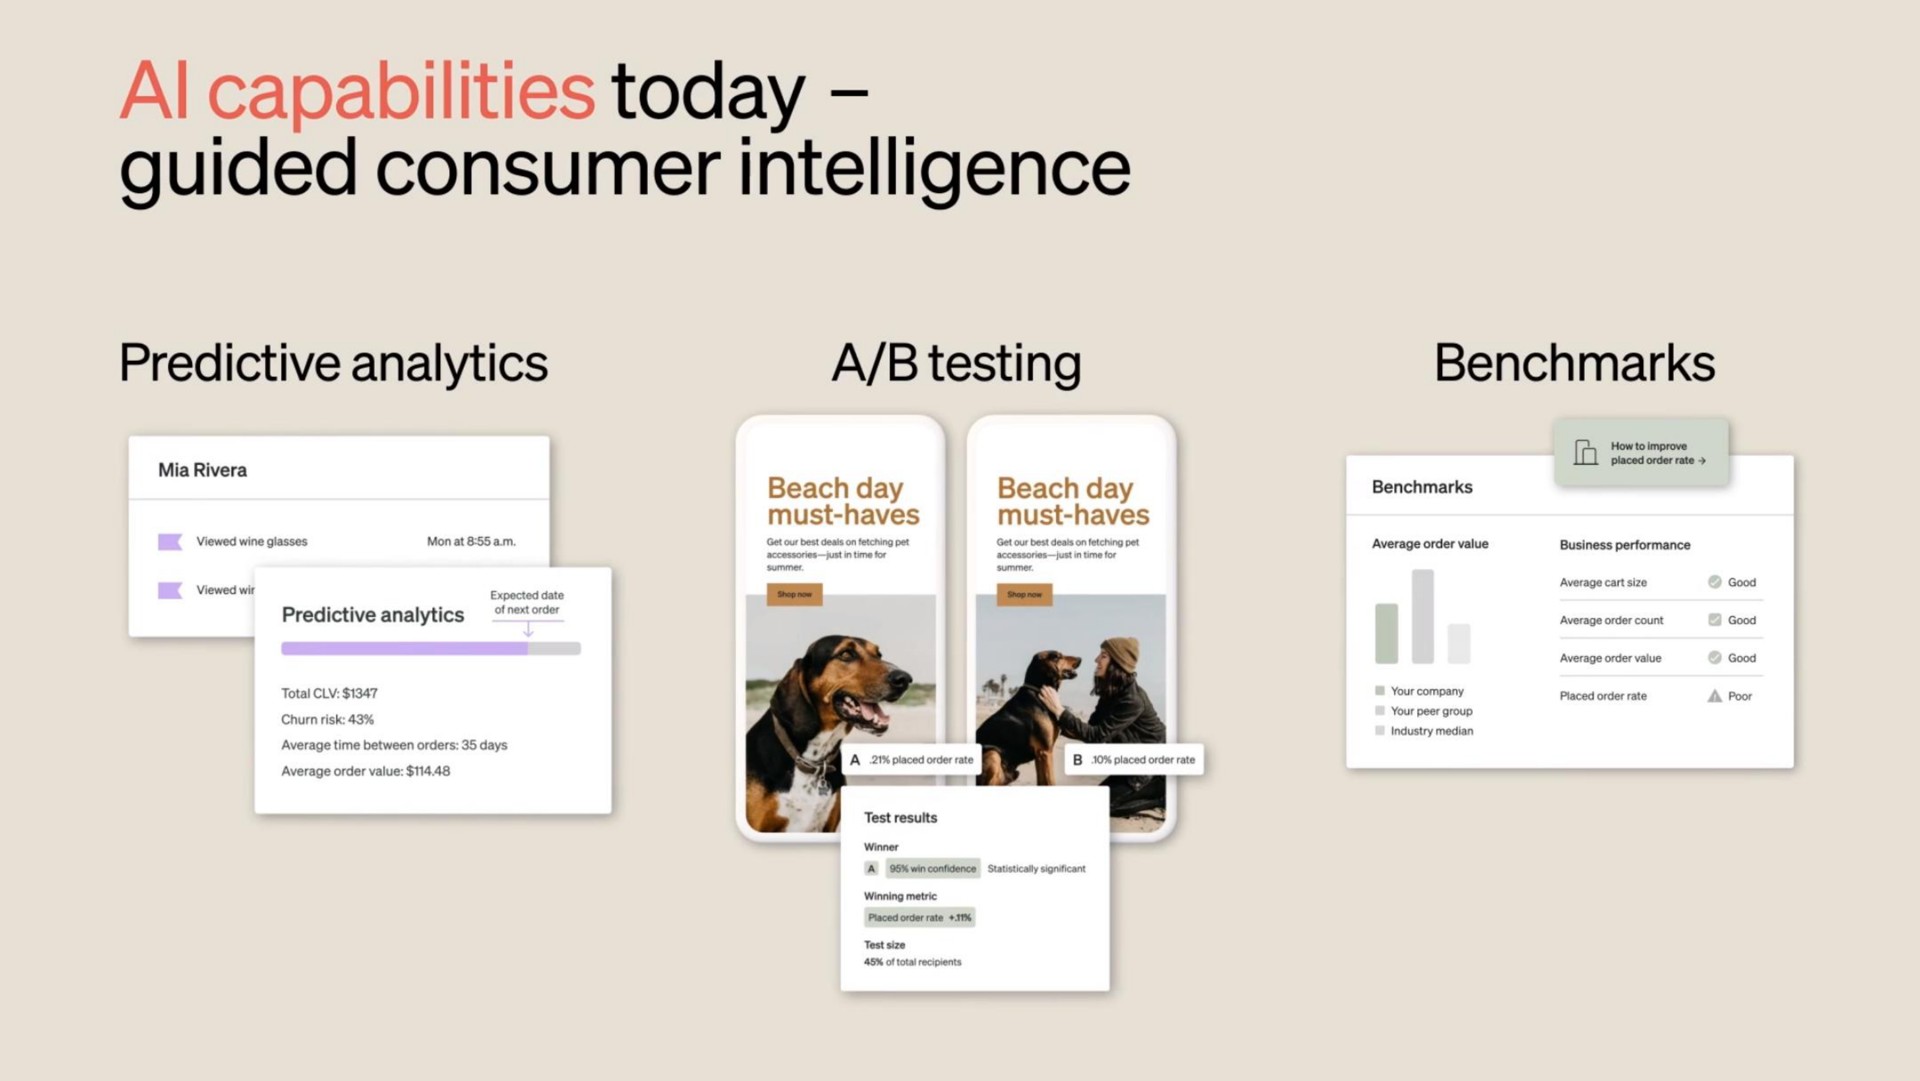 capabilities today guided consumer intelligence predictive analytics a testing viewed wine glasses mon at a viewed wir predictive analytics total churn risk average time between orders days average order value beach day must haves best deals on fetching pet ust in time for beach day must haves bur best deals on fetching a test results winner a statistically significant winning metric placed order rate test size of total recipients how to improve placed order rate average order value business performance average cart size average order count average order value placed order rate good good good poor your company your peer group industry median | Klaviyo